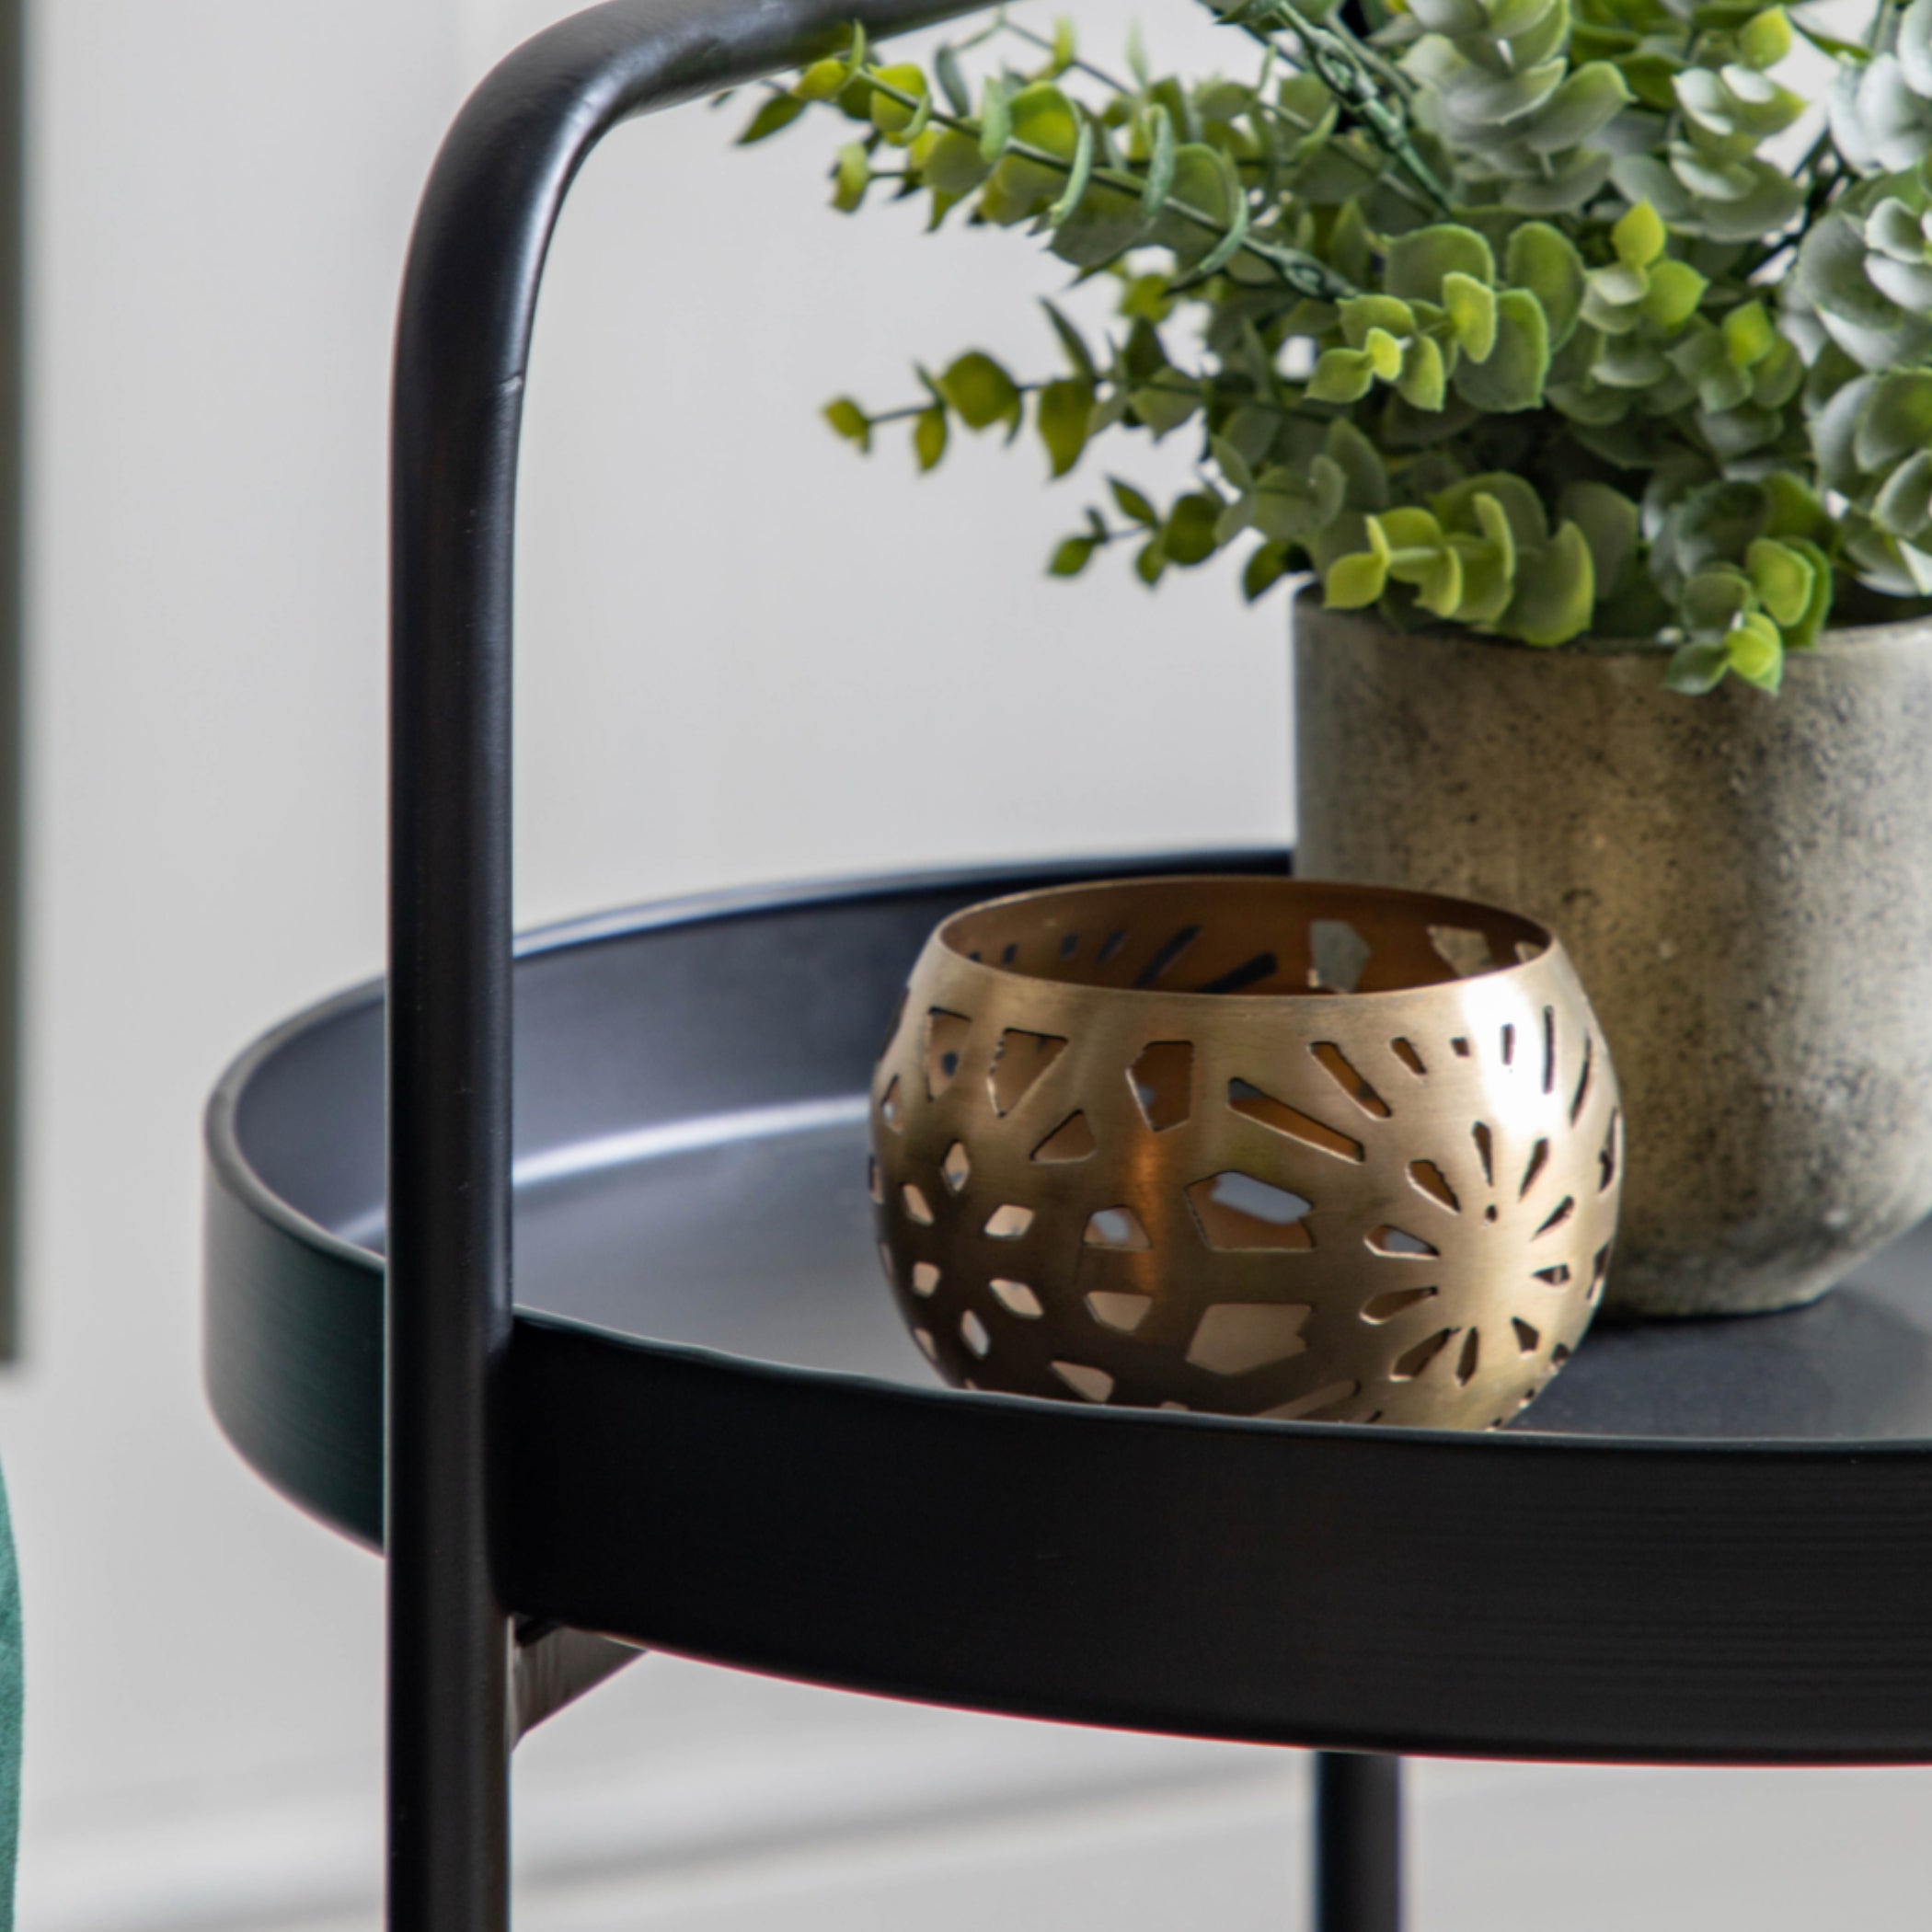 Black Round Two Tier Side Table - The Farthing